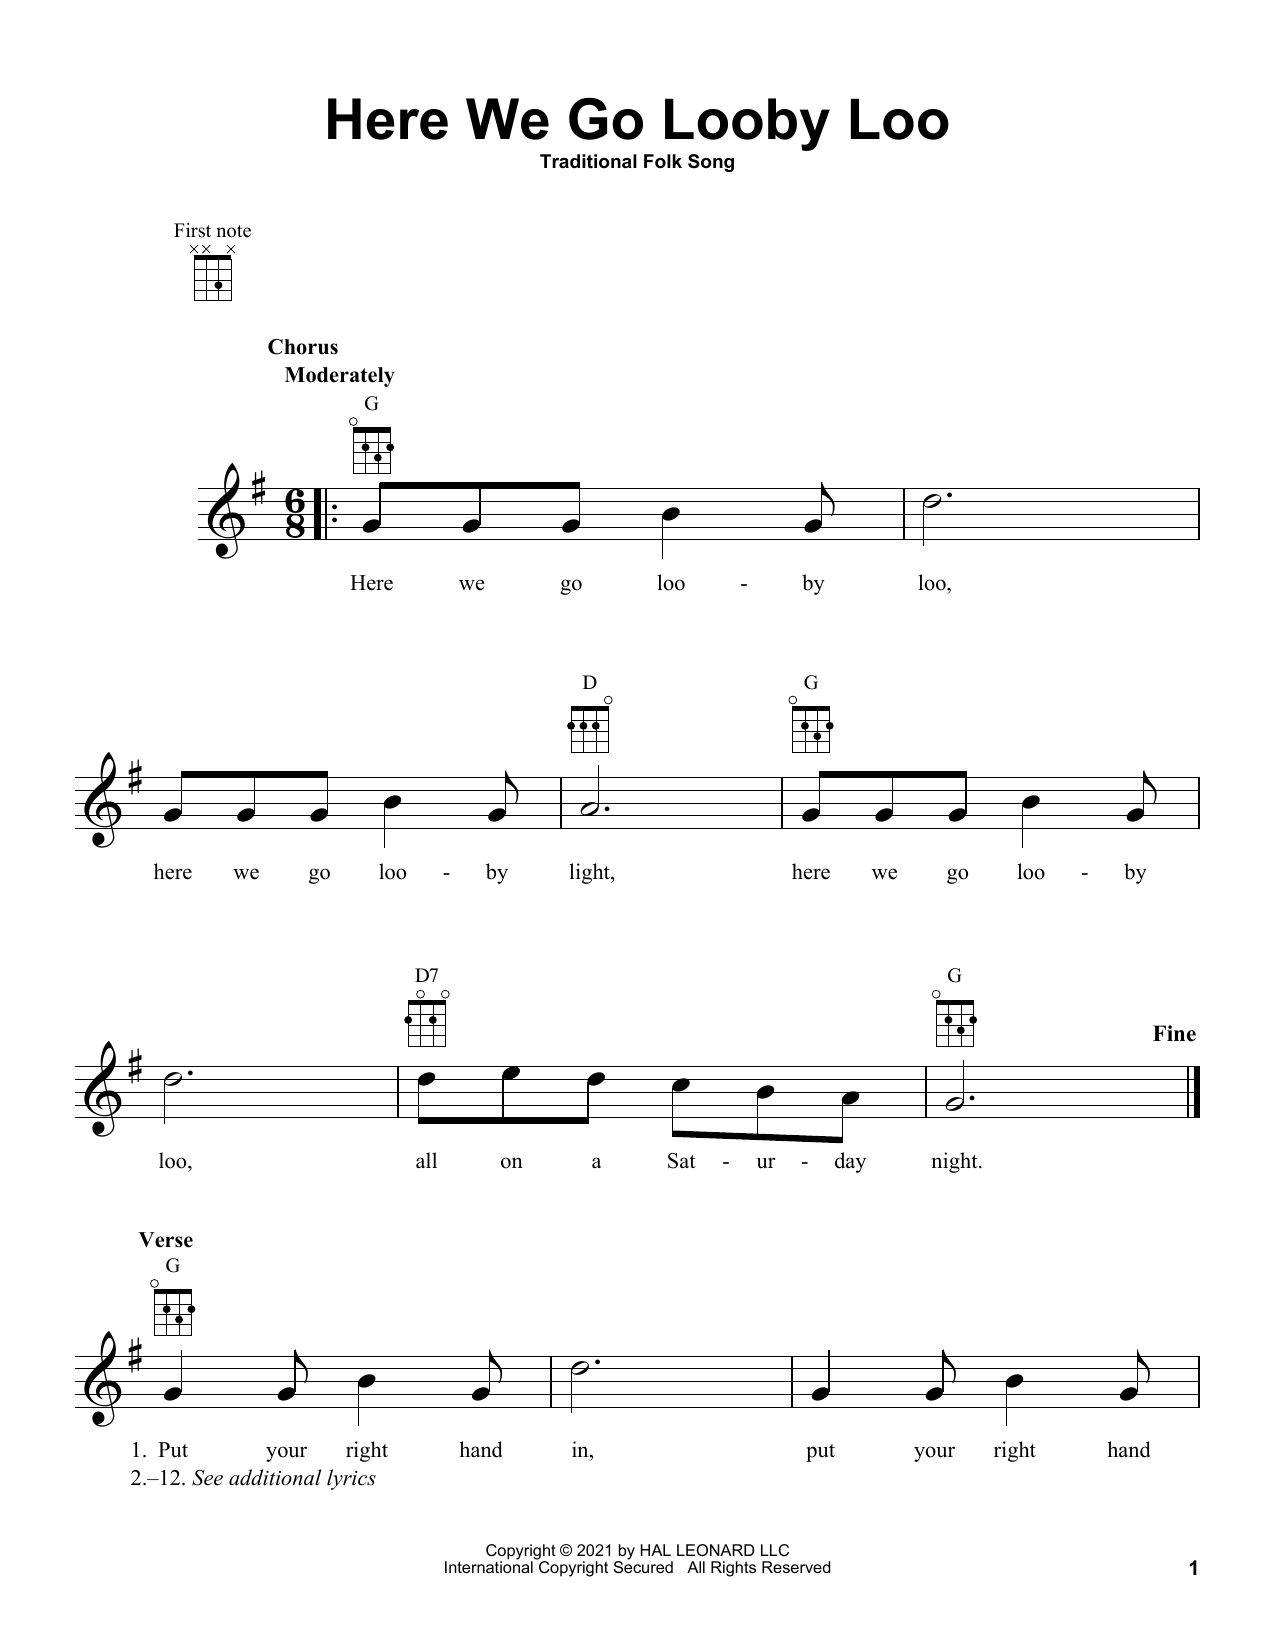 Download Traditional Folk Song Here We Go Looby Loo Sheet Music